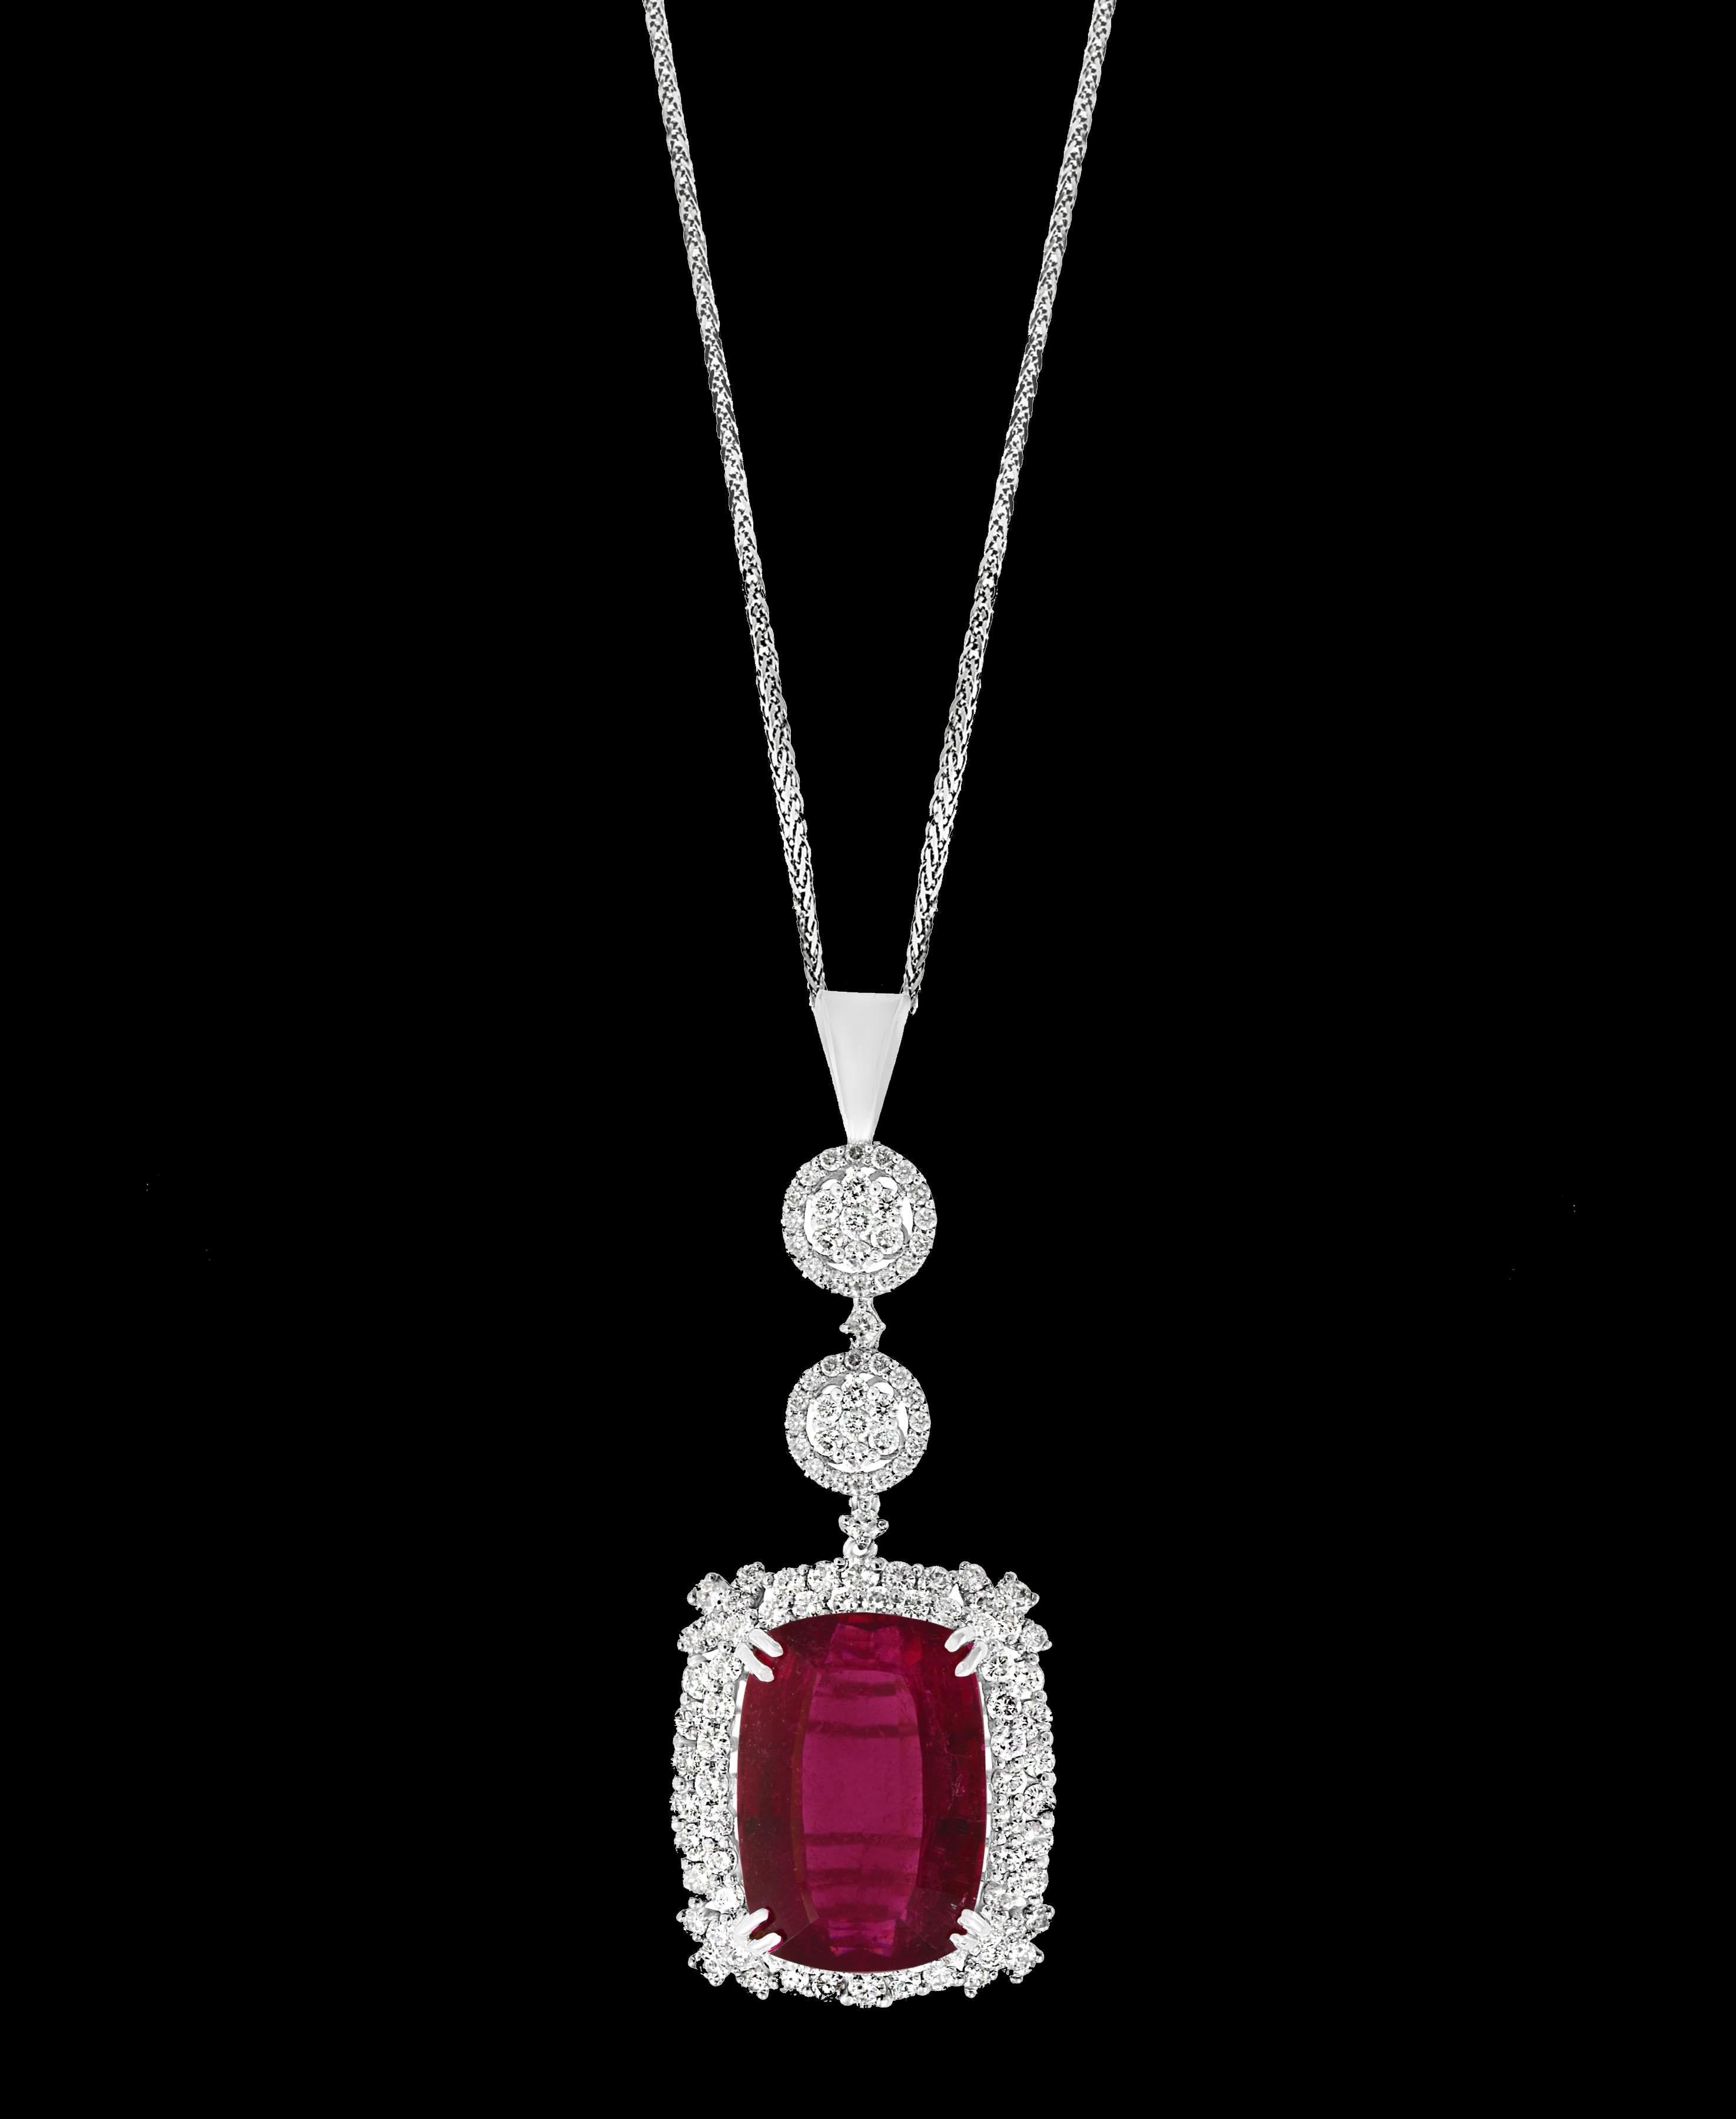  This spectacular Pendant Necklace is a true masterpiece, consisting of a single Cushion Shape Rubelite that weighs an impressive 16.97 Carat. The Rubelite is surrounded by approximately 4 Carats of brilliant cut diamonds, which add to the overall